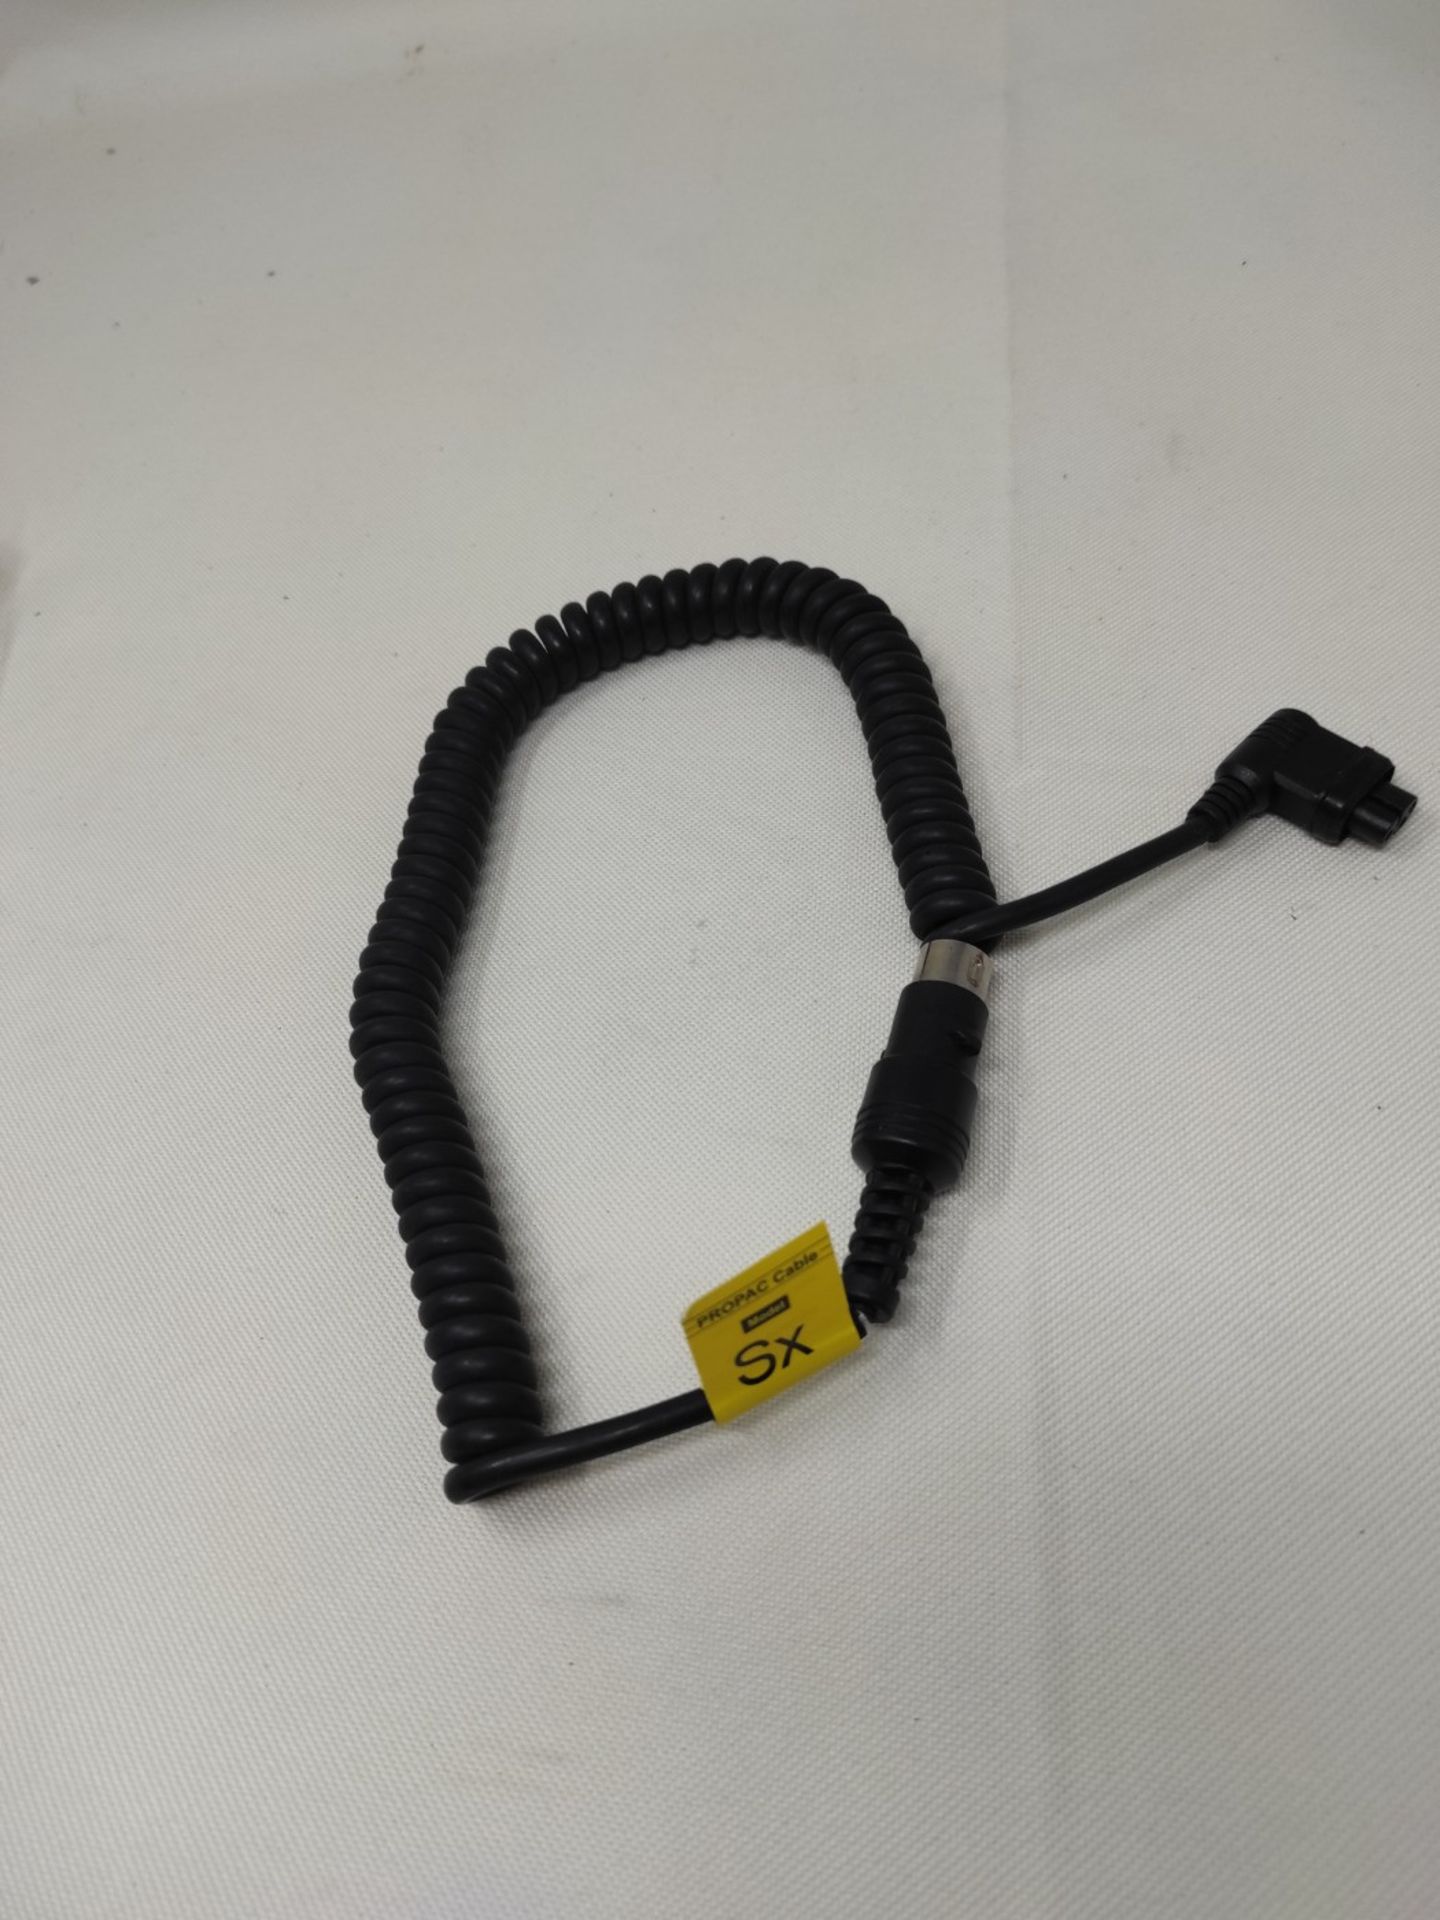 Propac Sx Cable for Camera - Image 2 of 2